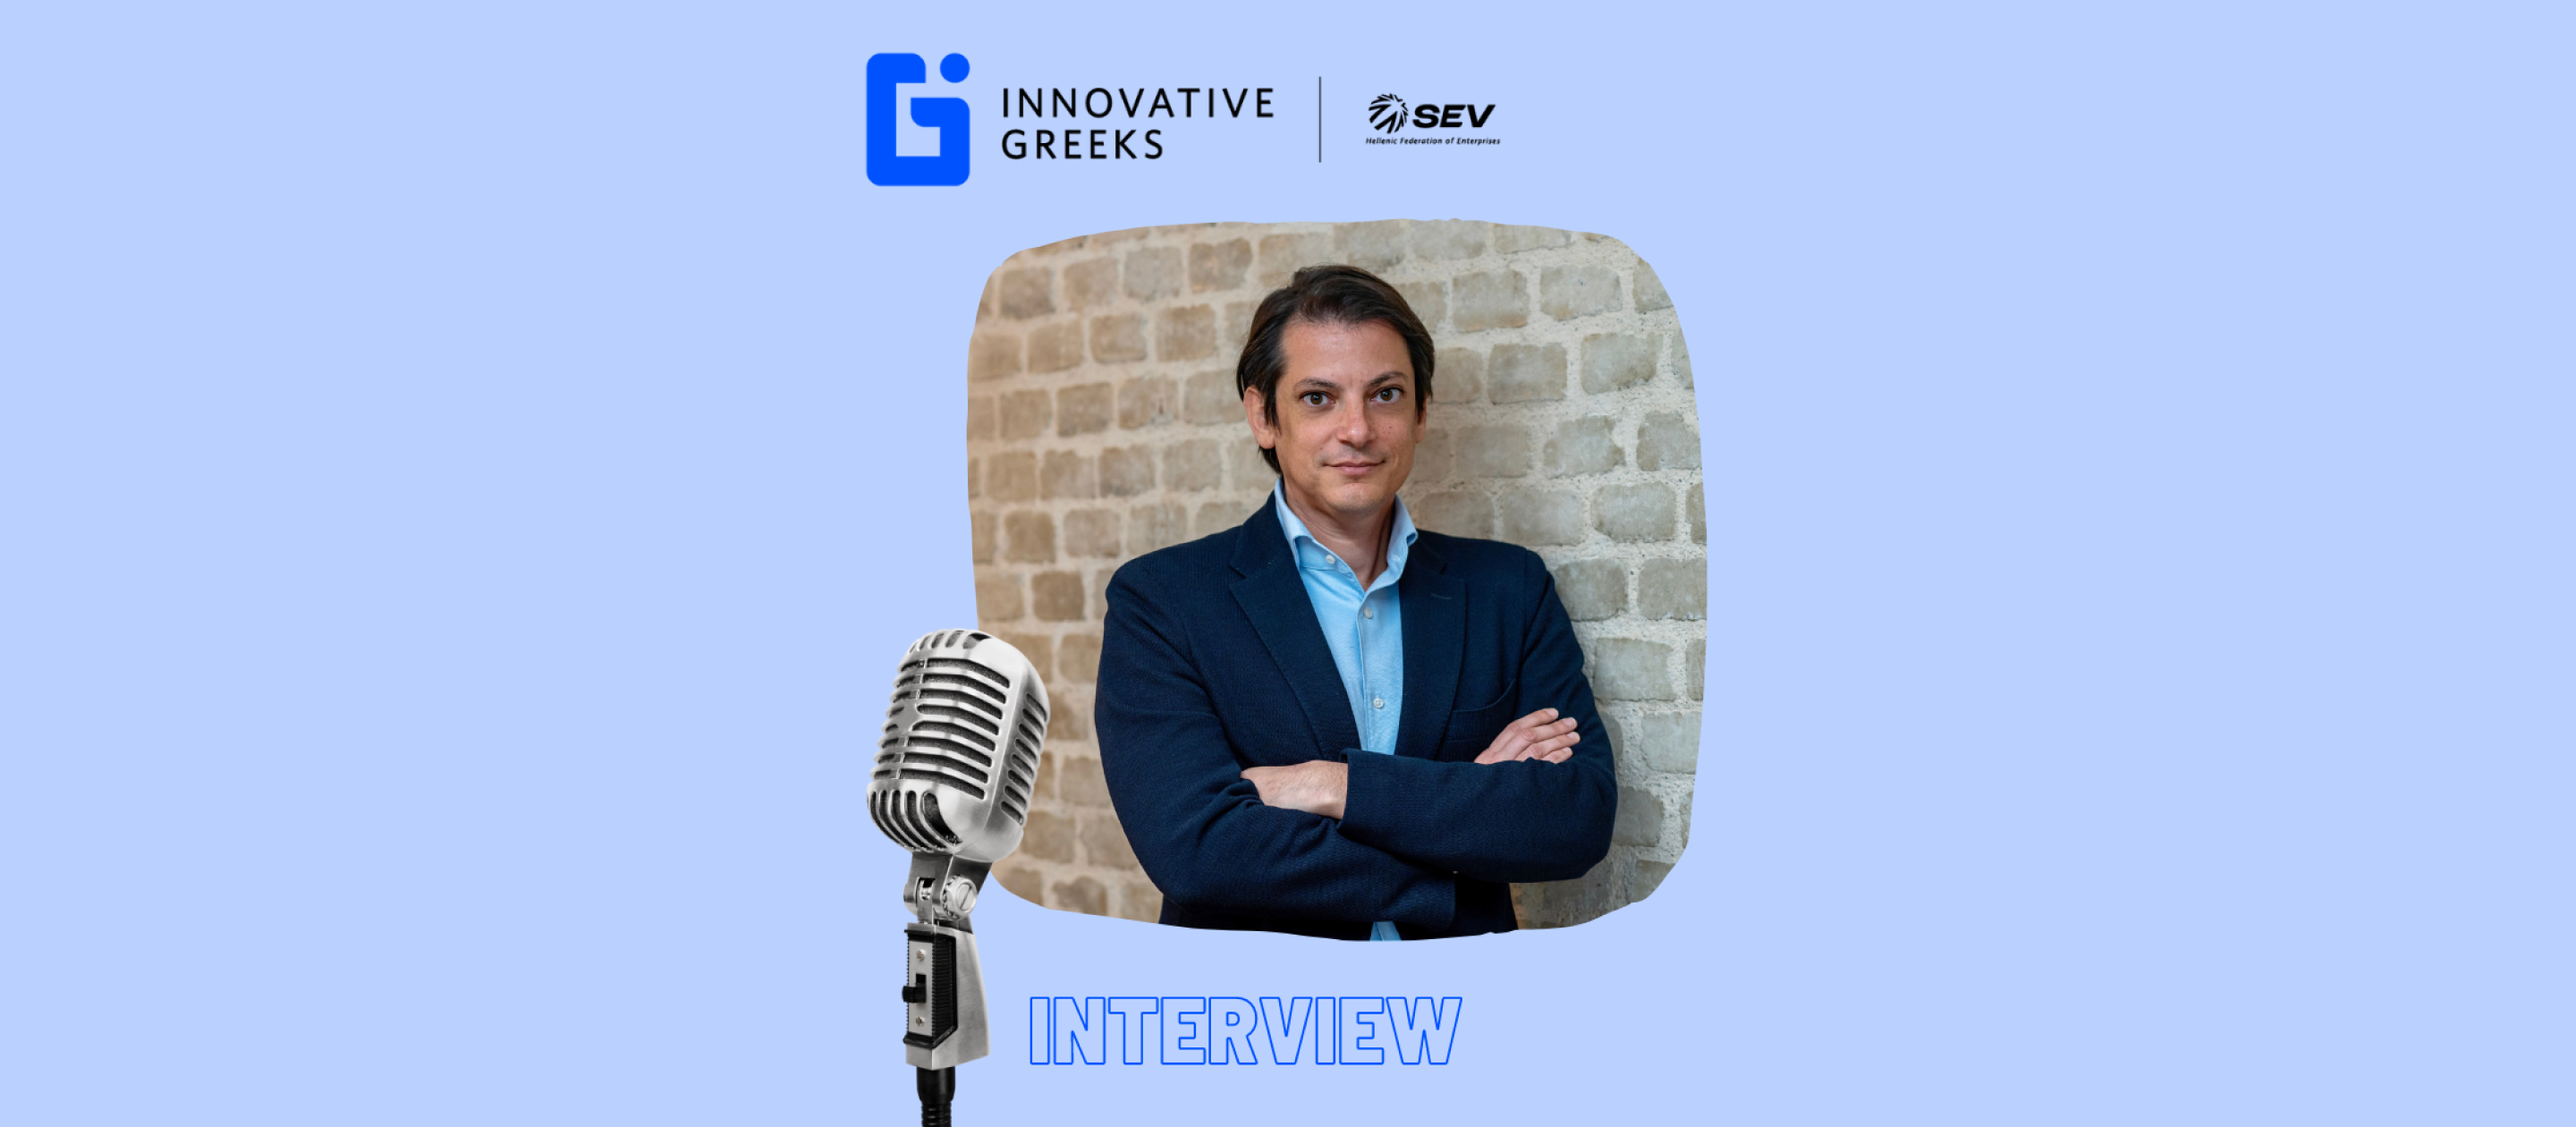 Michael Georgakopoulos' interview for Innovative Greeks 